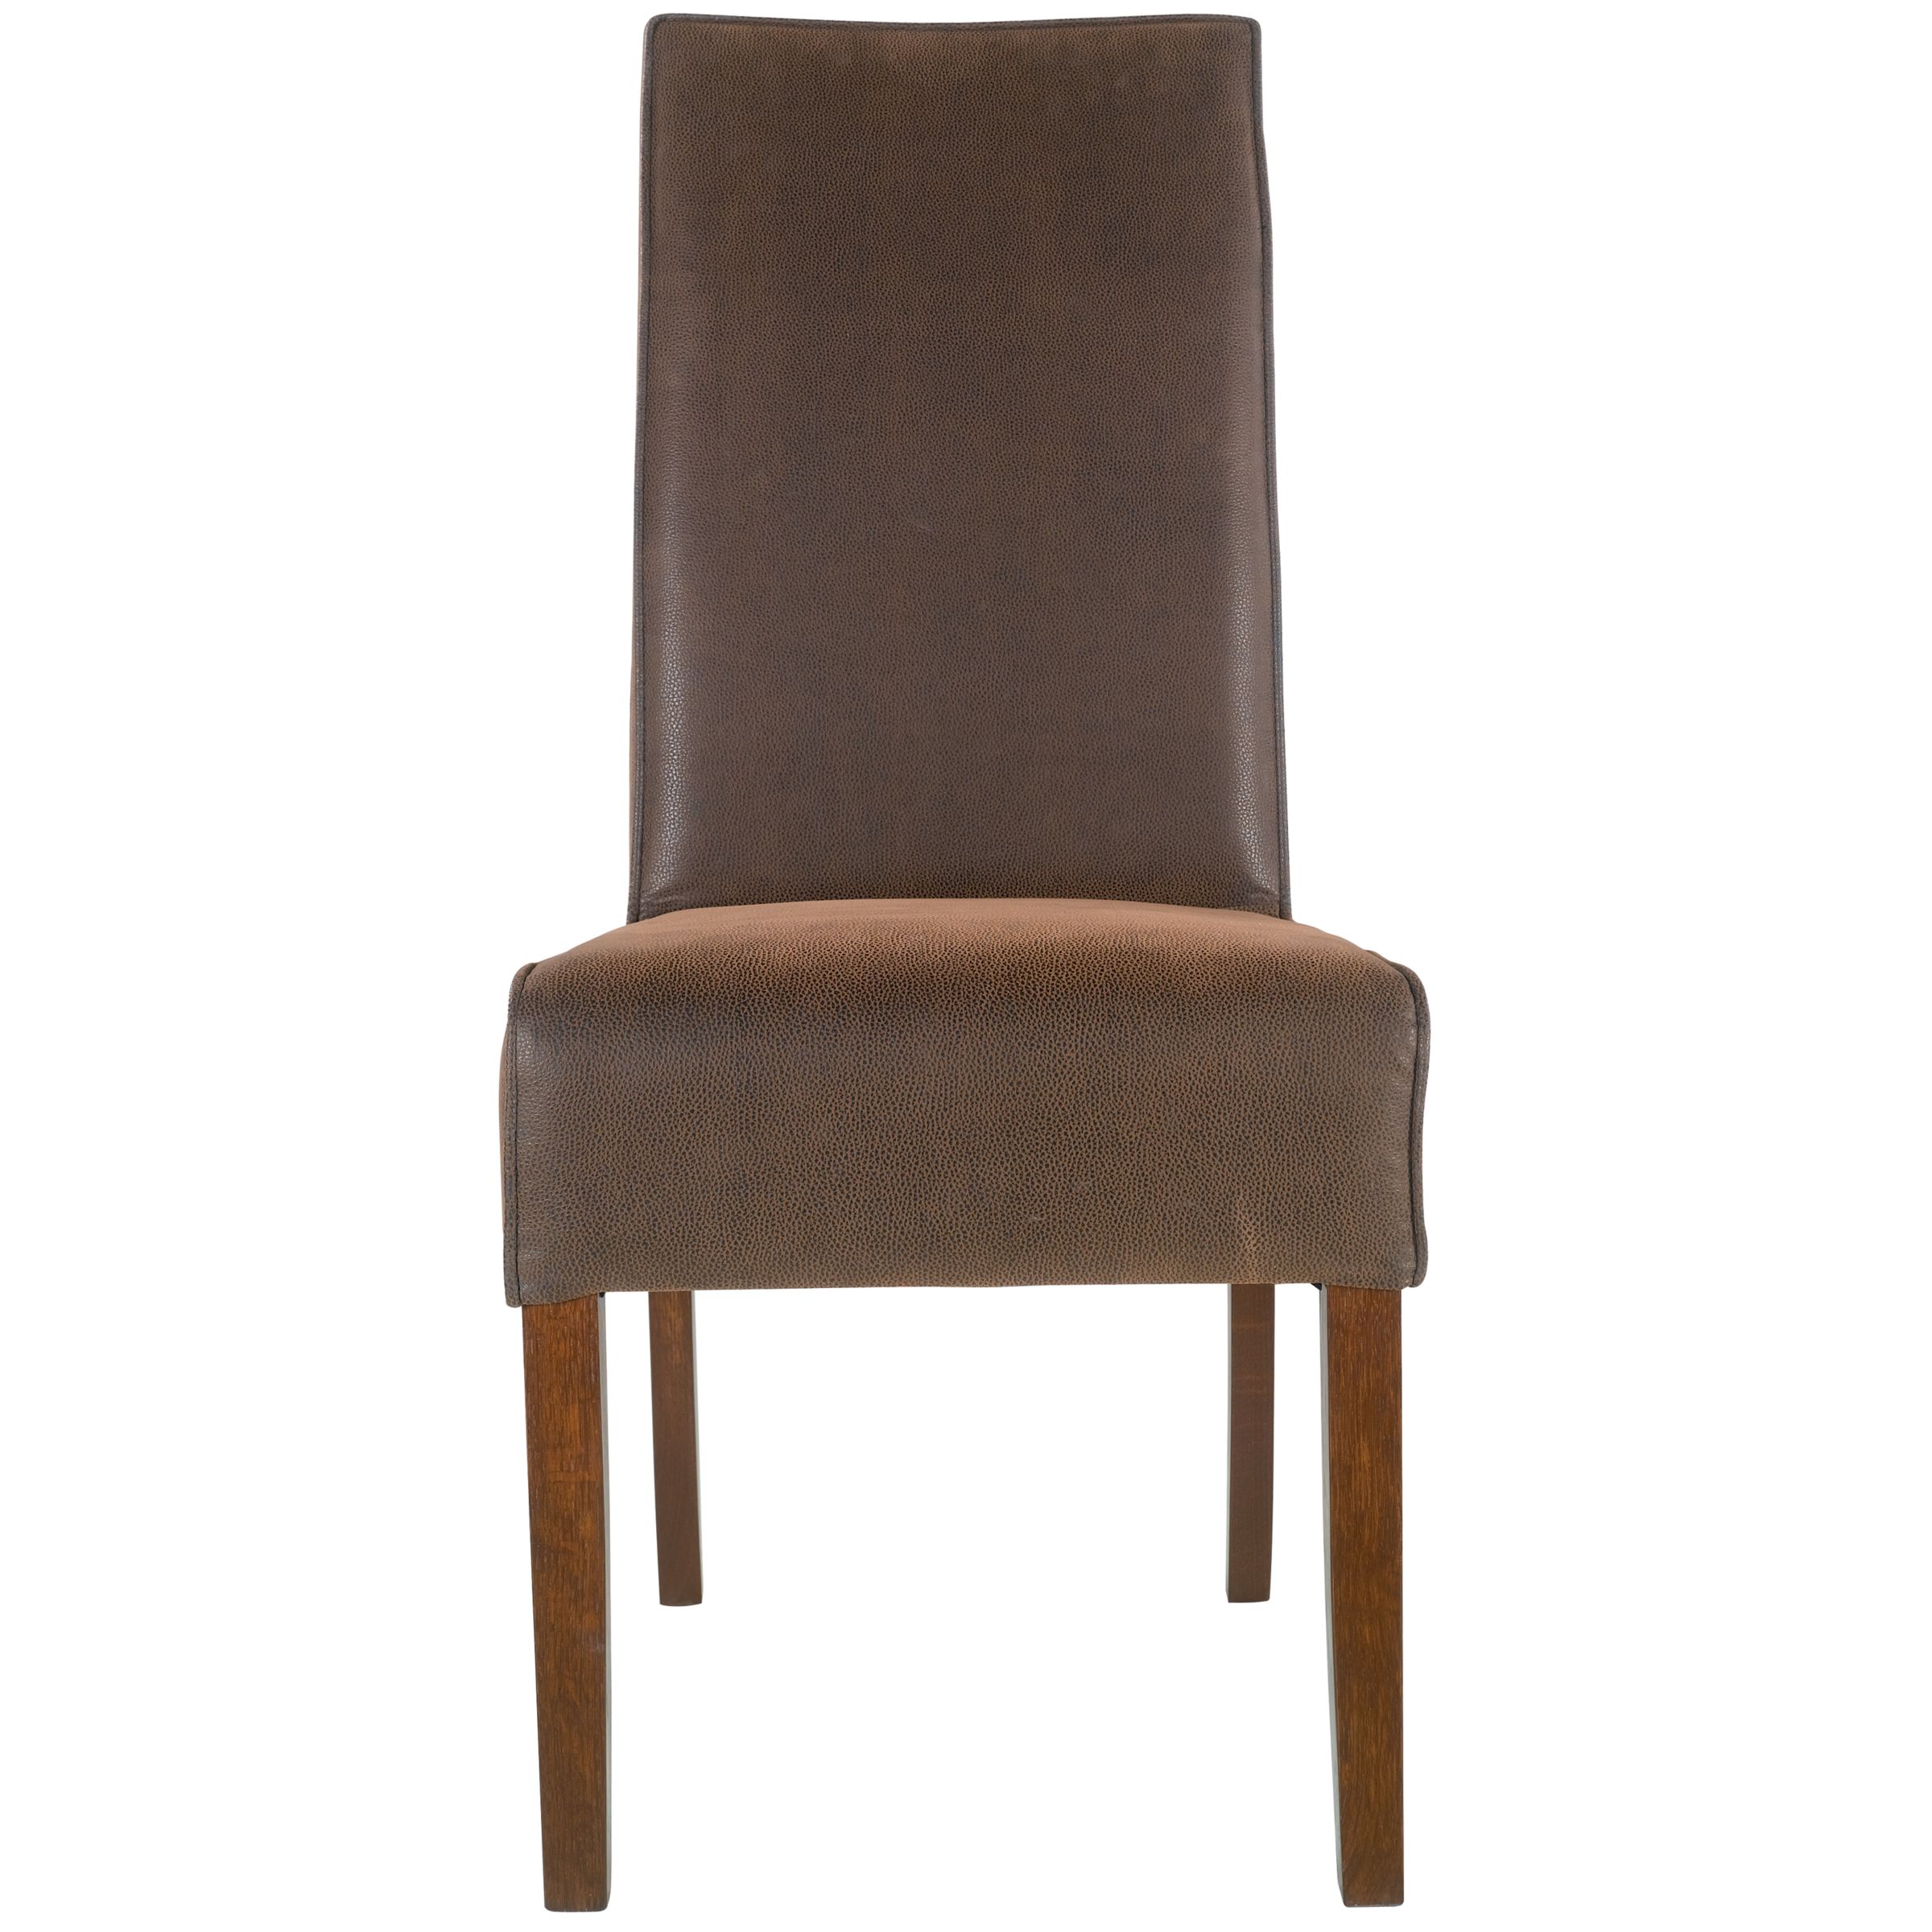 Indos Dining Chair, Chocolate